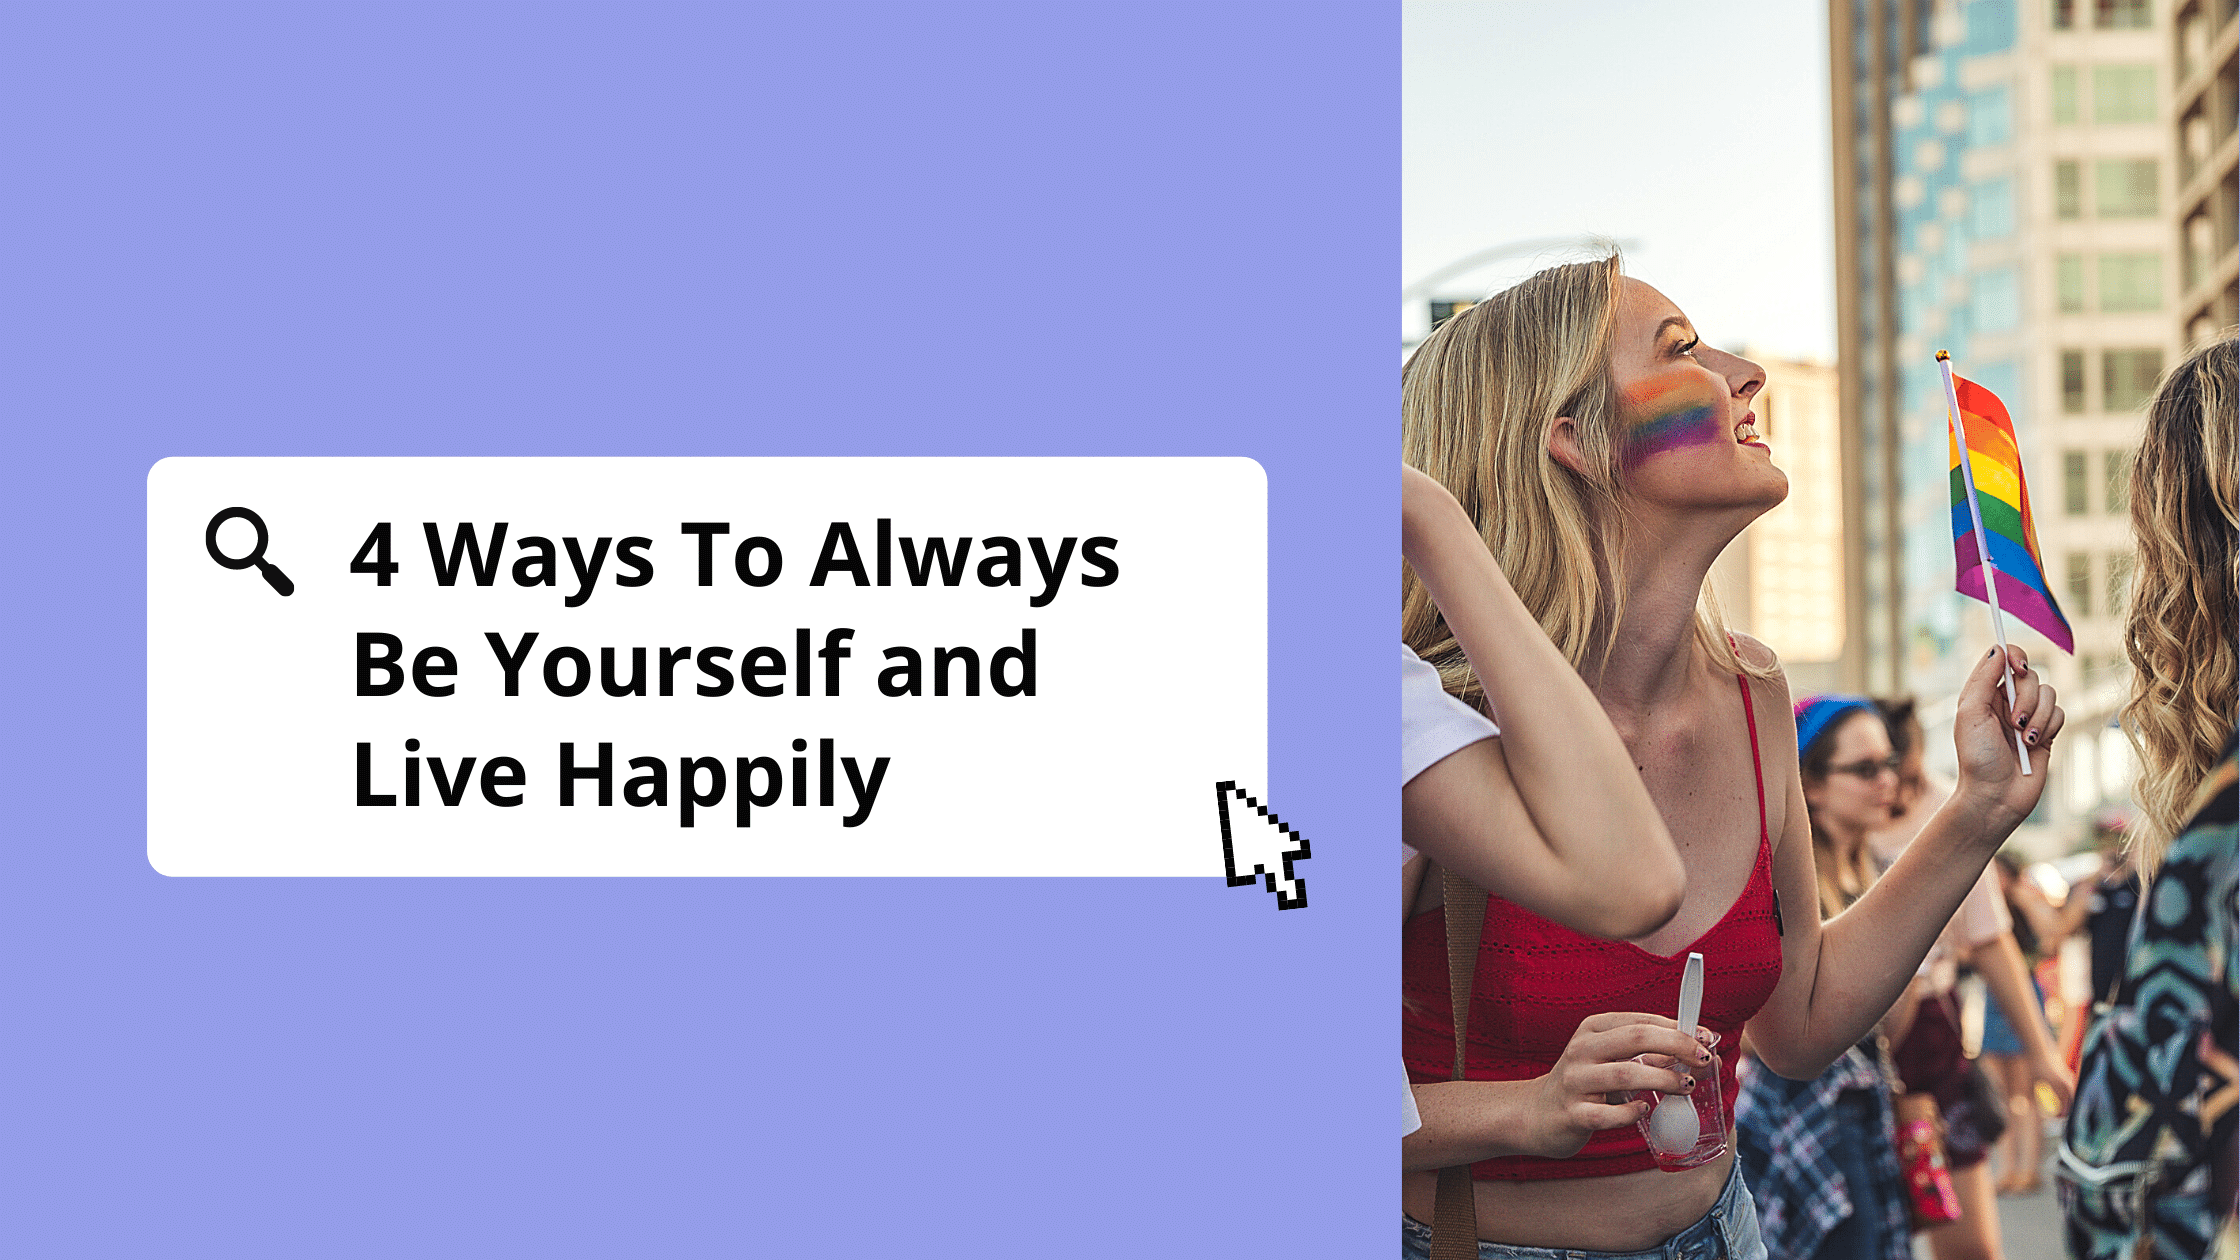 4 Ways To Always Be Yourself and Live Happily